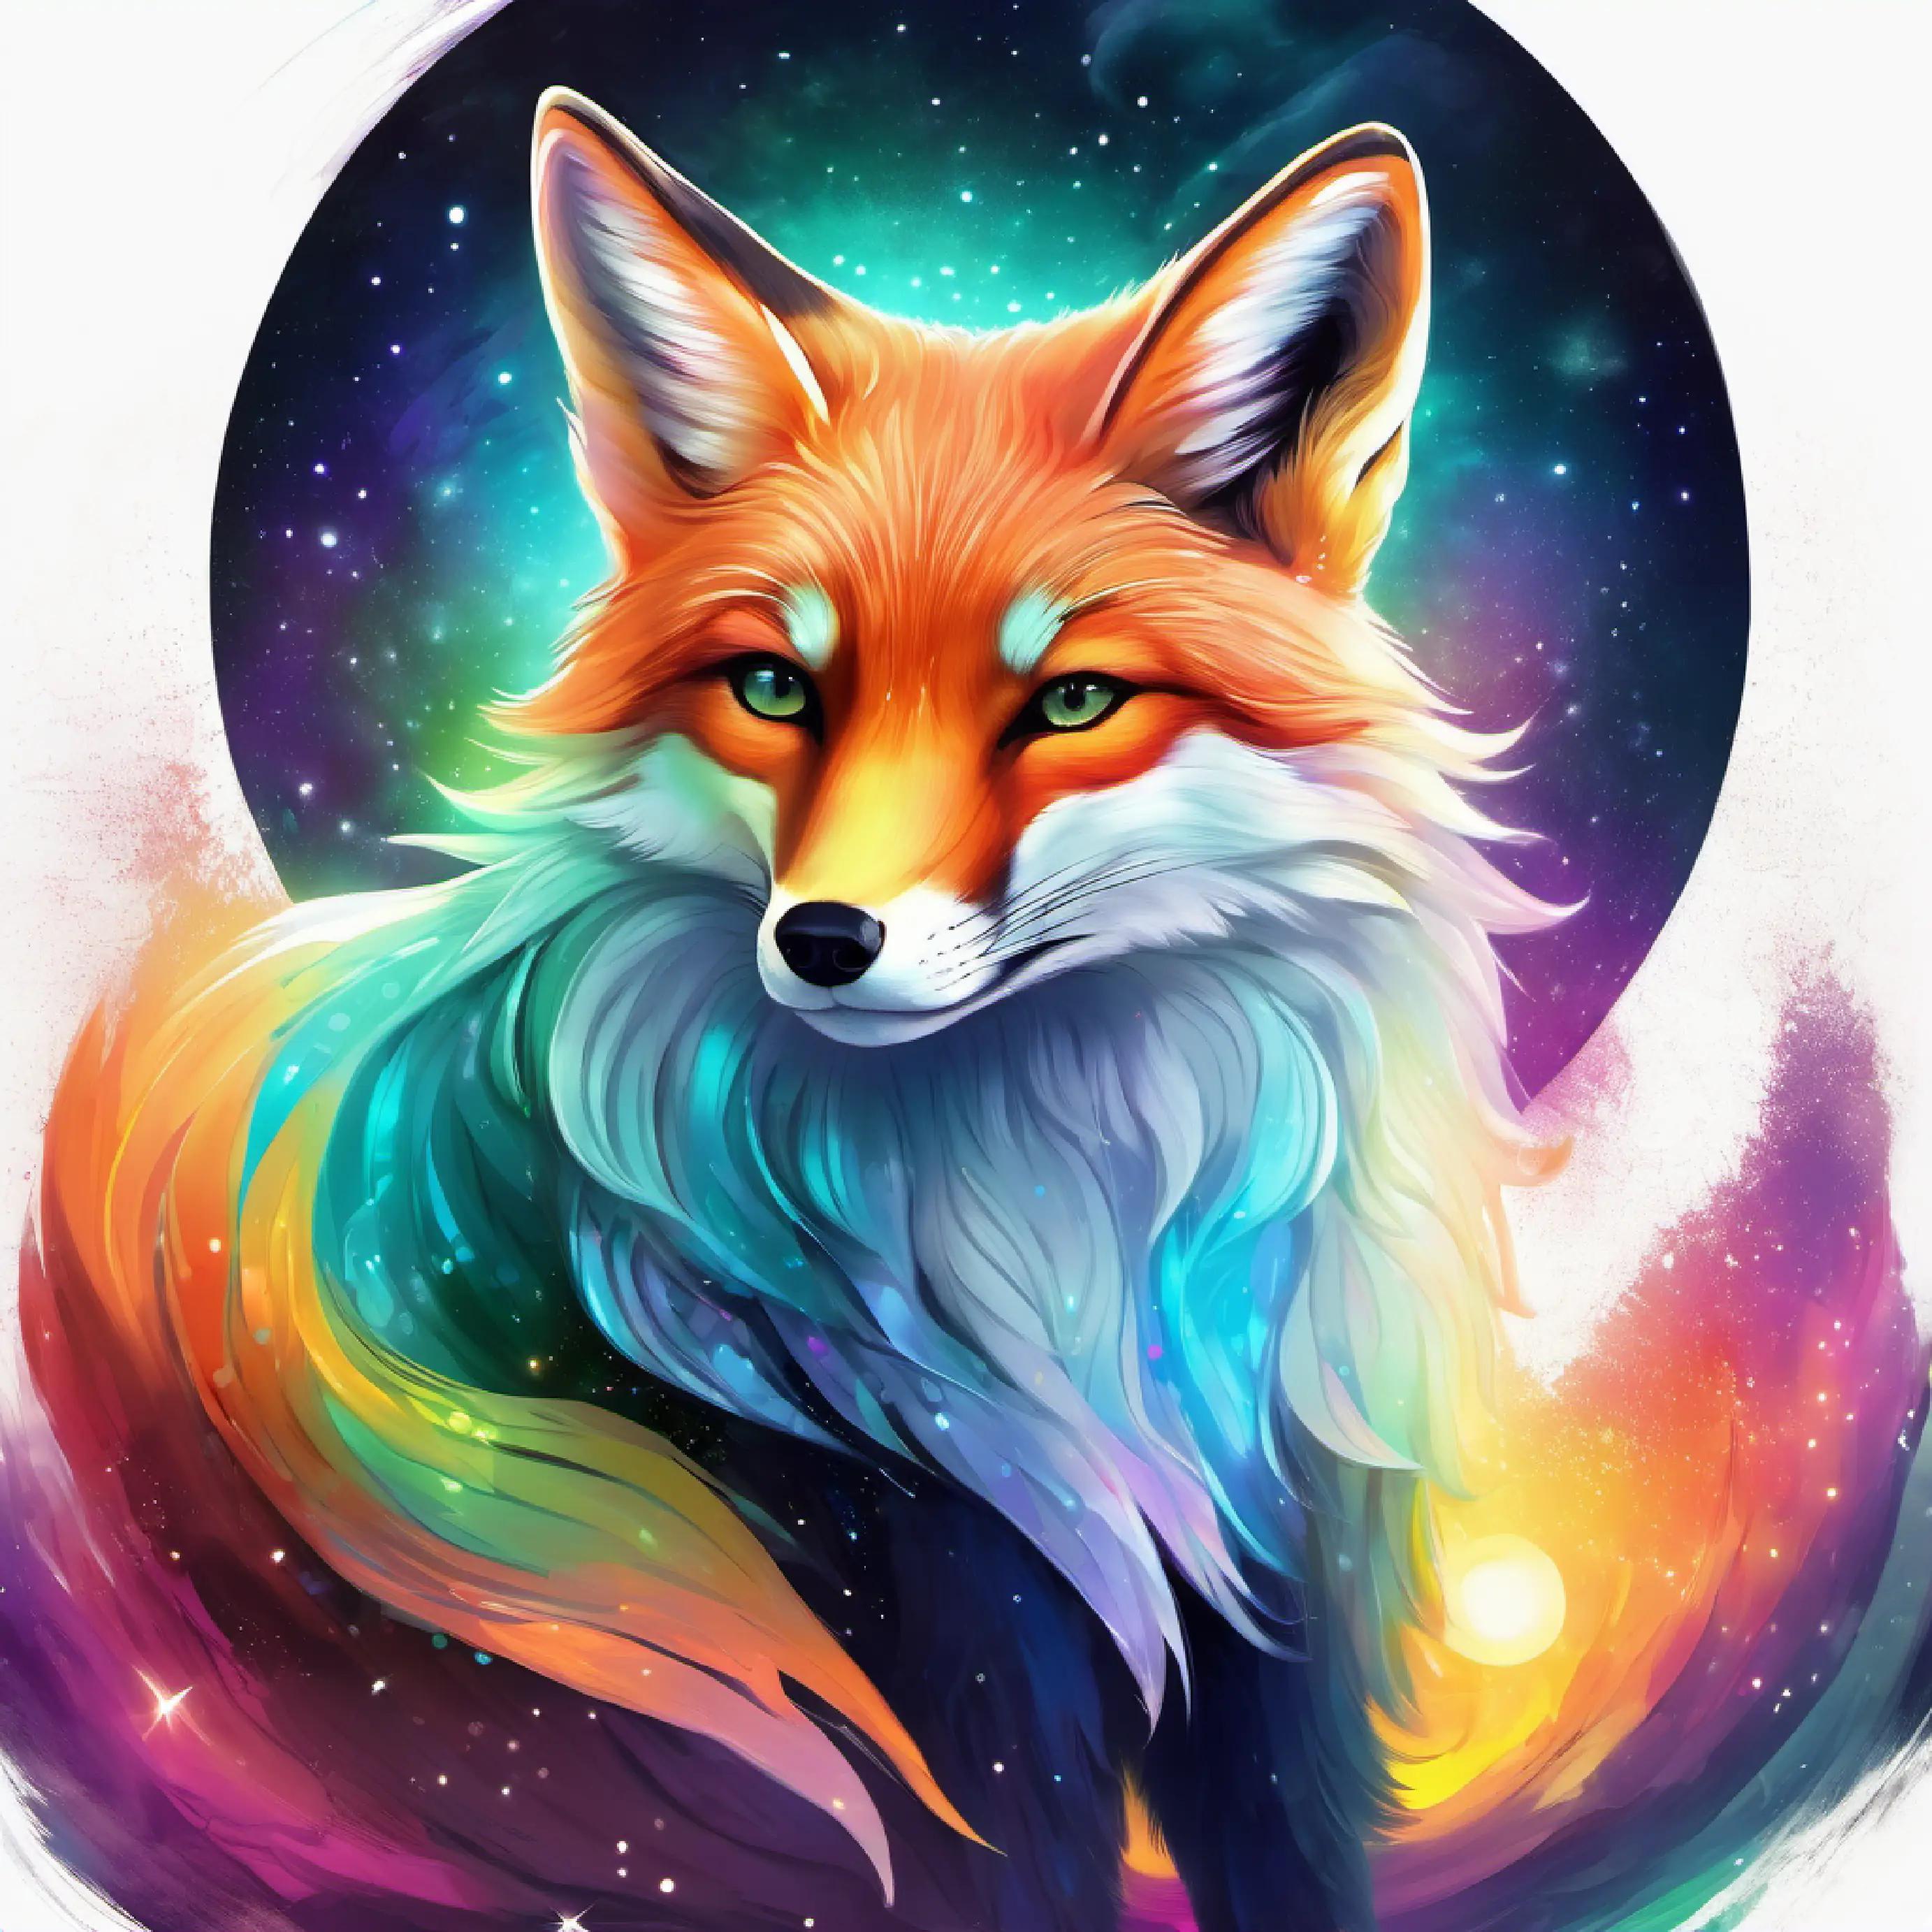 Aurora Spirit with ever-changing colorful aura, wise and kind gives the fox a riddle about the moon.